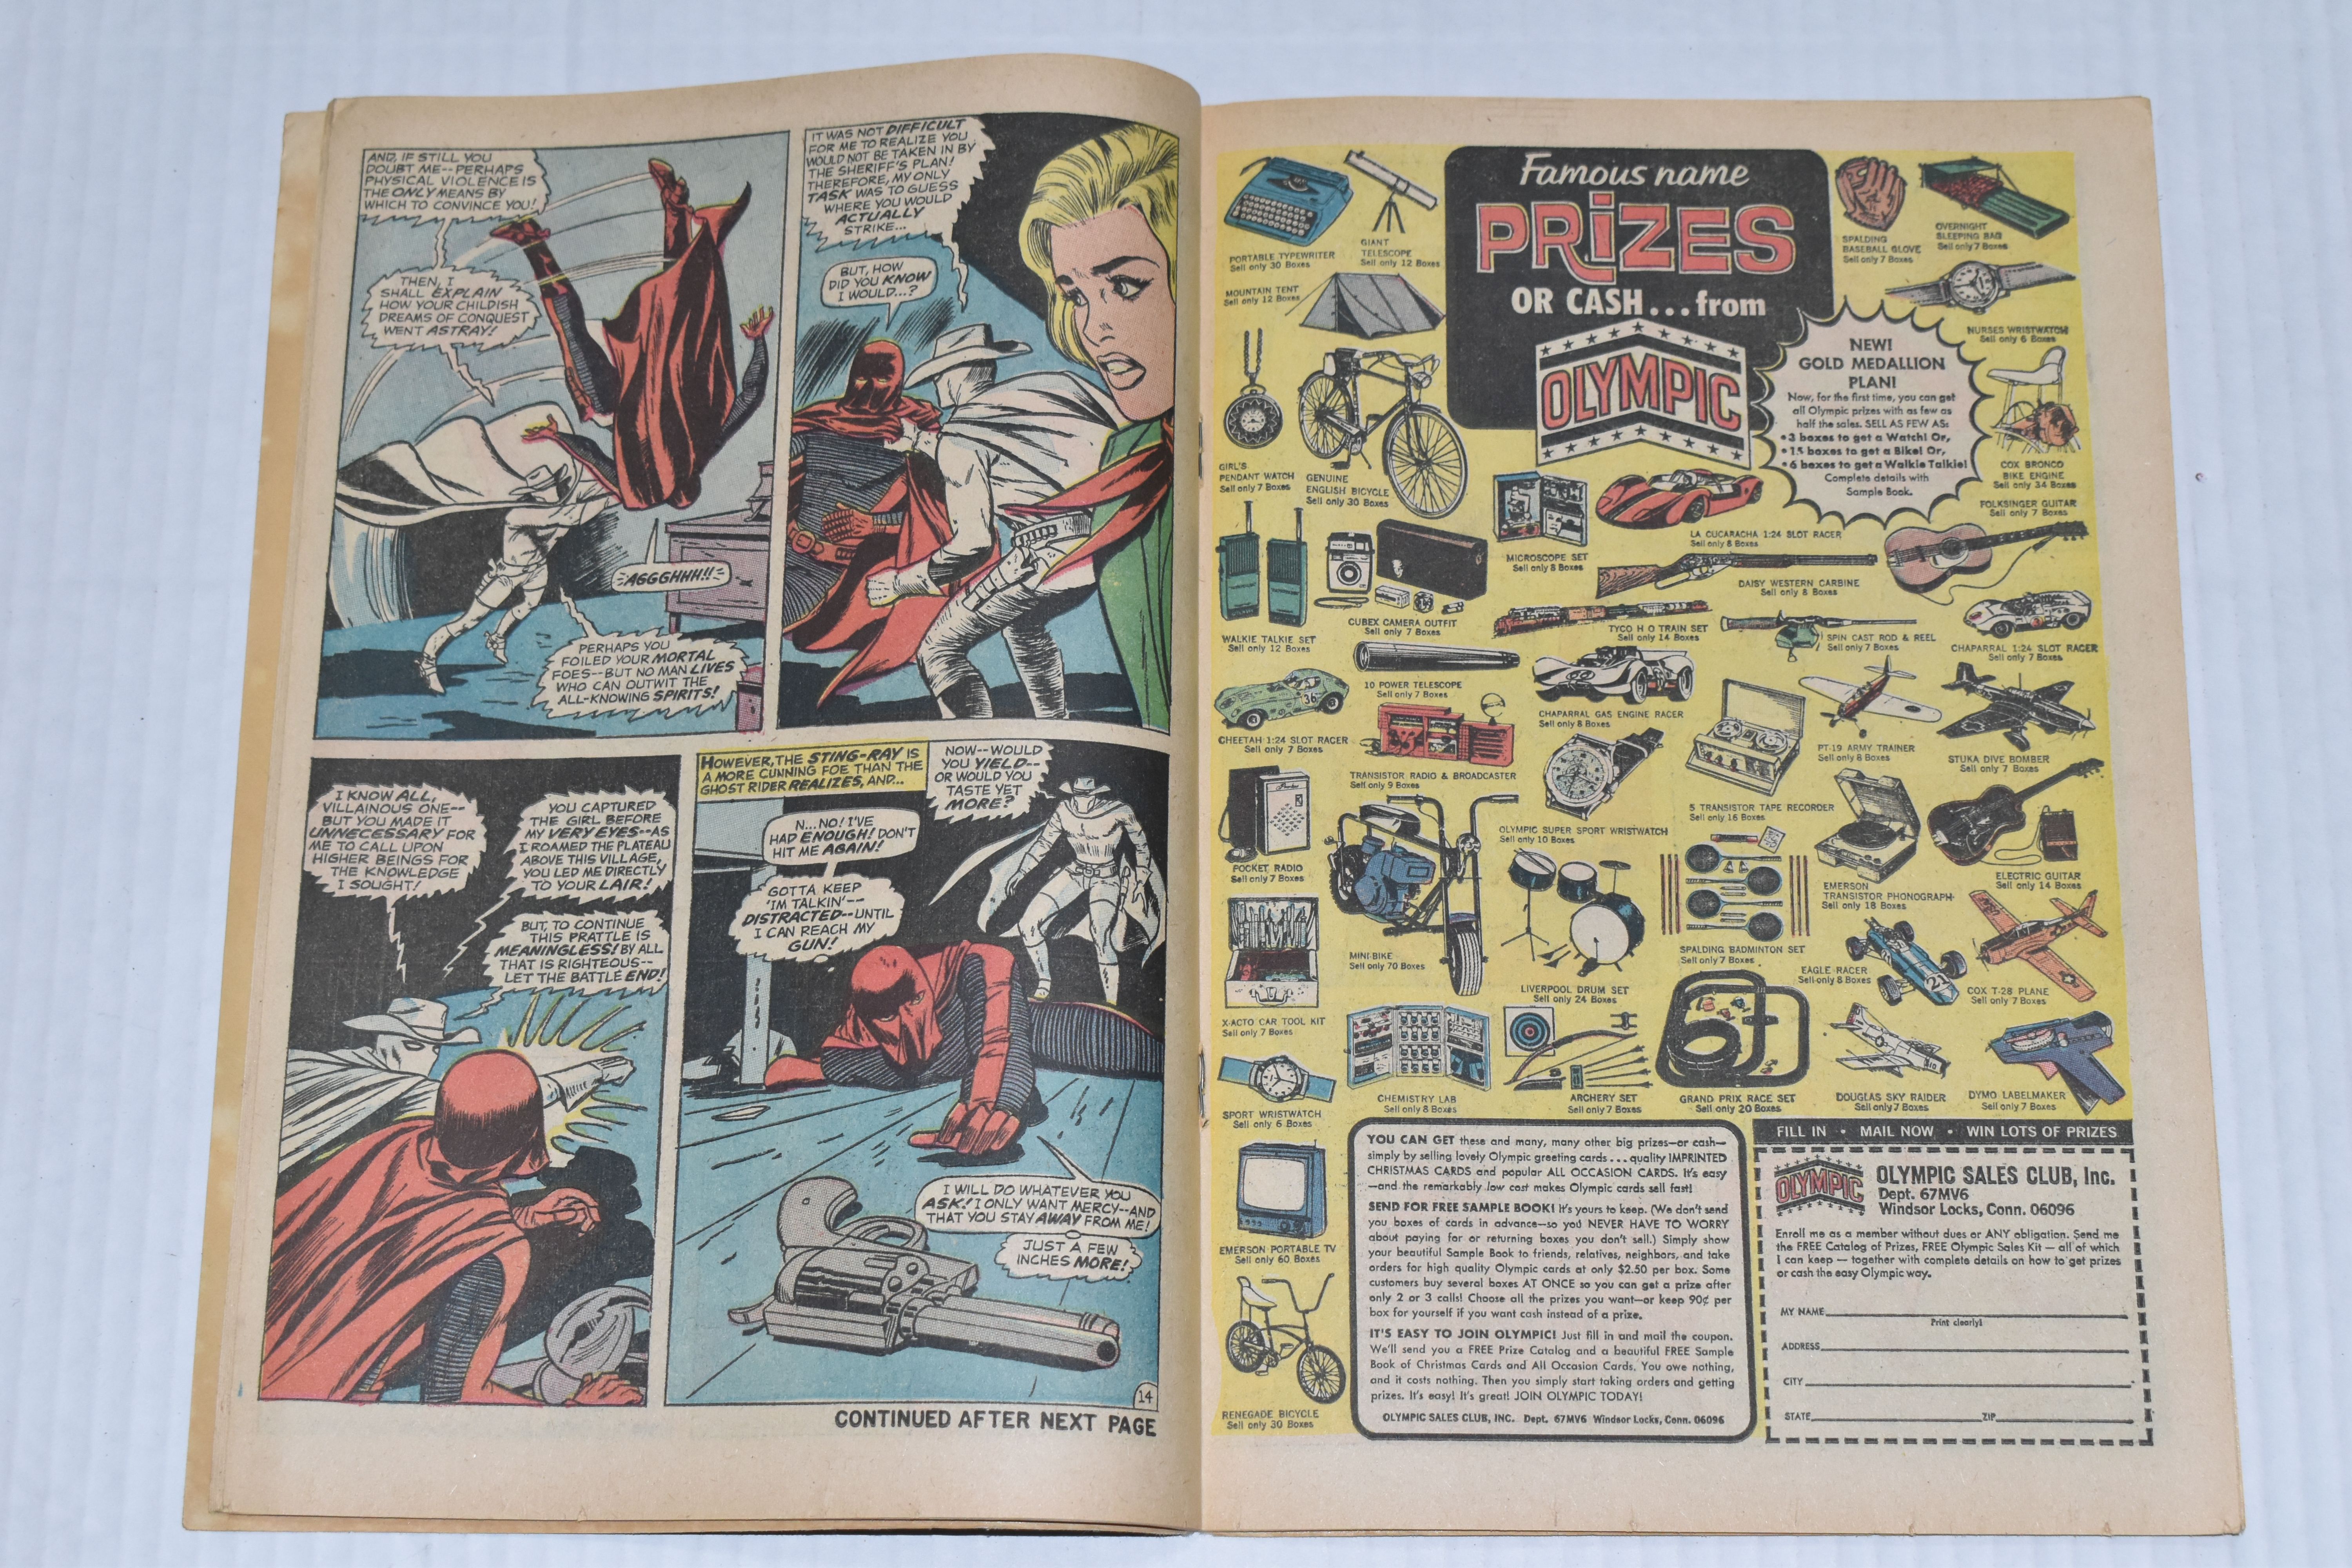 COMPLETE ORIGINAL GHOST RIDER VOLUME 1 MARVEL COMICS, features the first appearance of the - Image 16 of 25